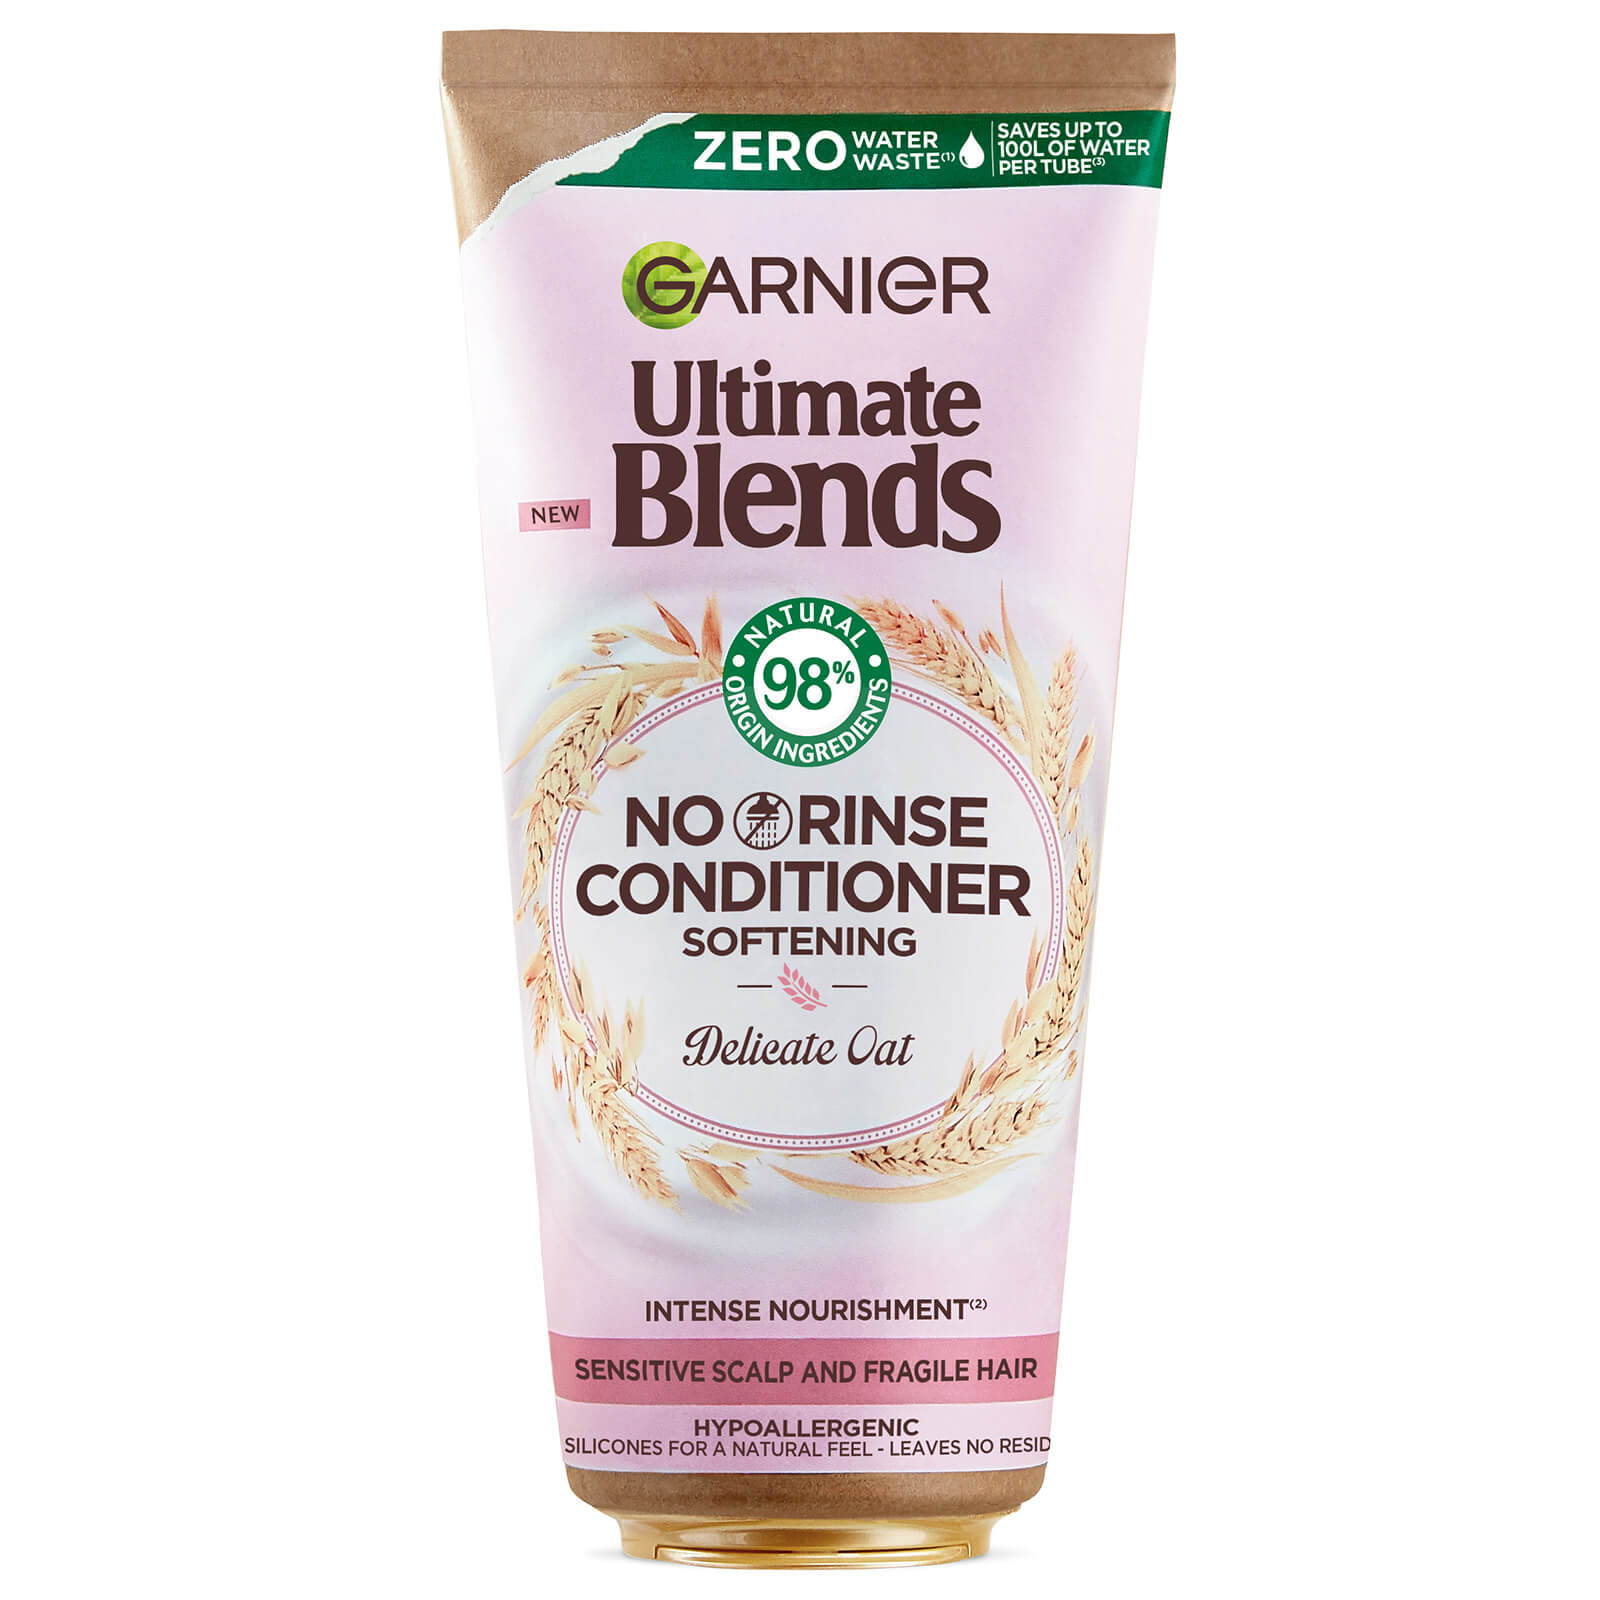 Garnier Ultimate Blends Delicate Oat Soothing NO RINSE Leave-in Conditioner for Sensitive Scalp and Fragile Hair 200ml